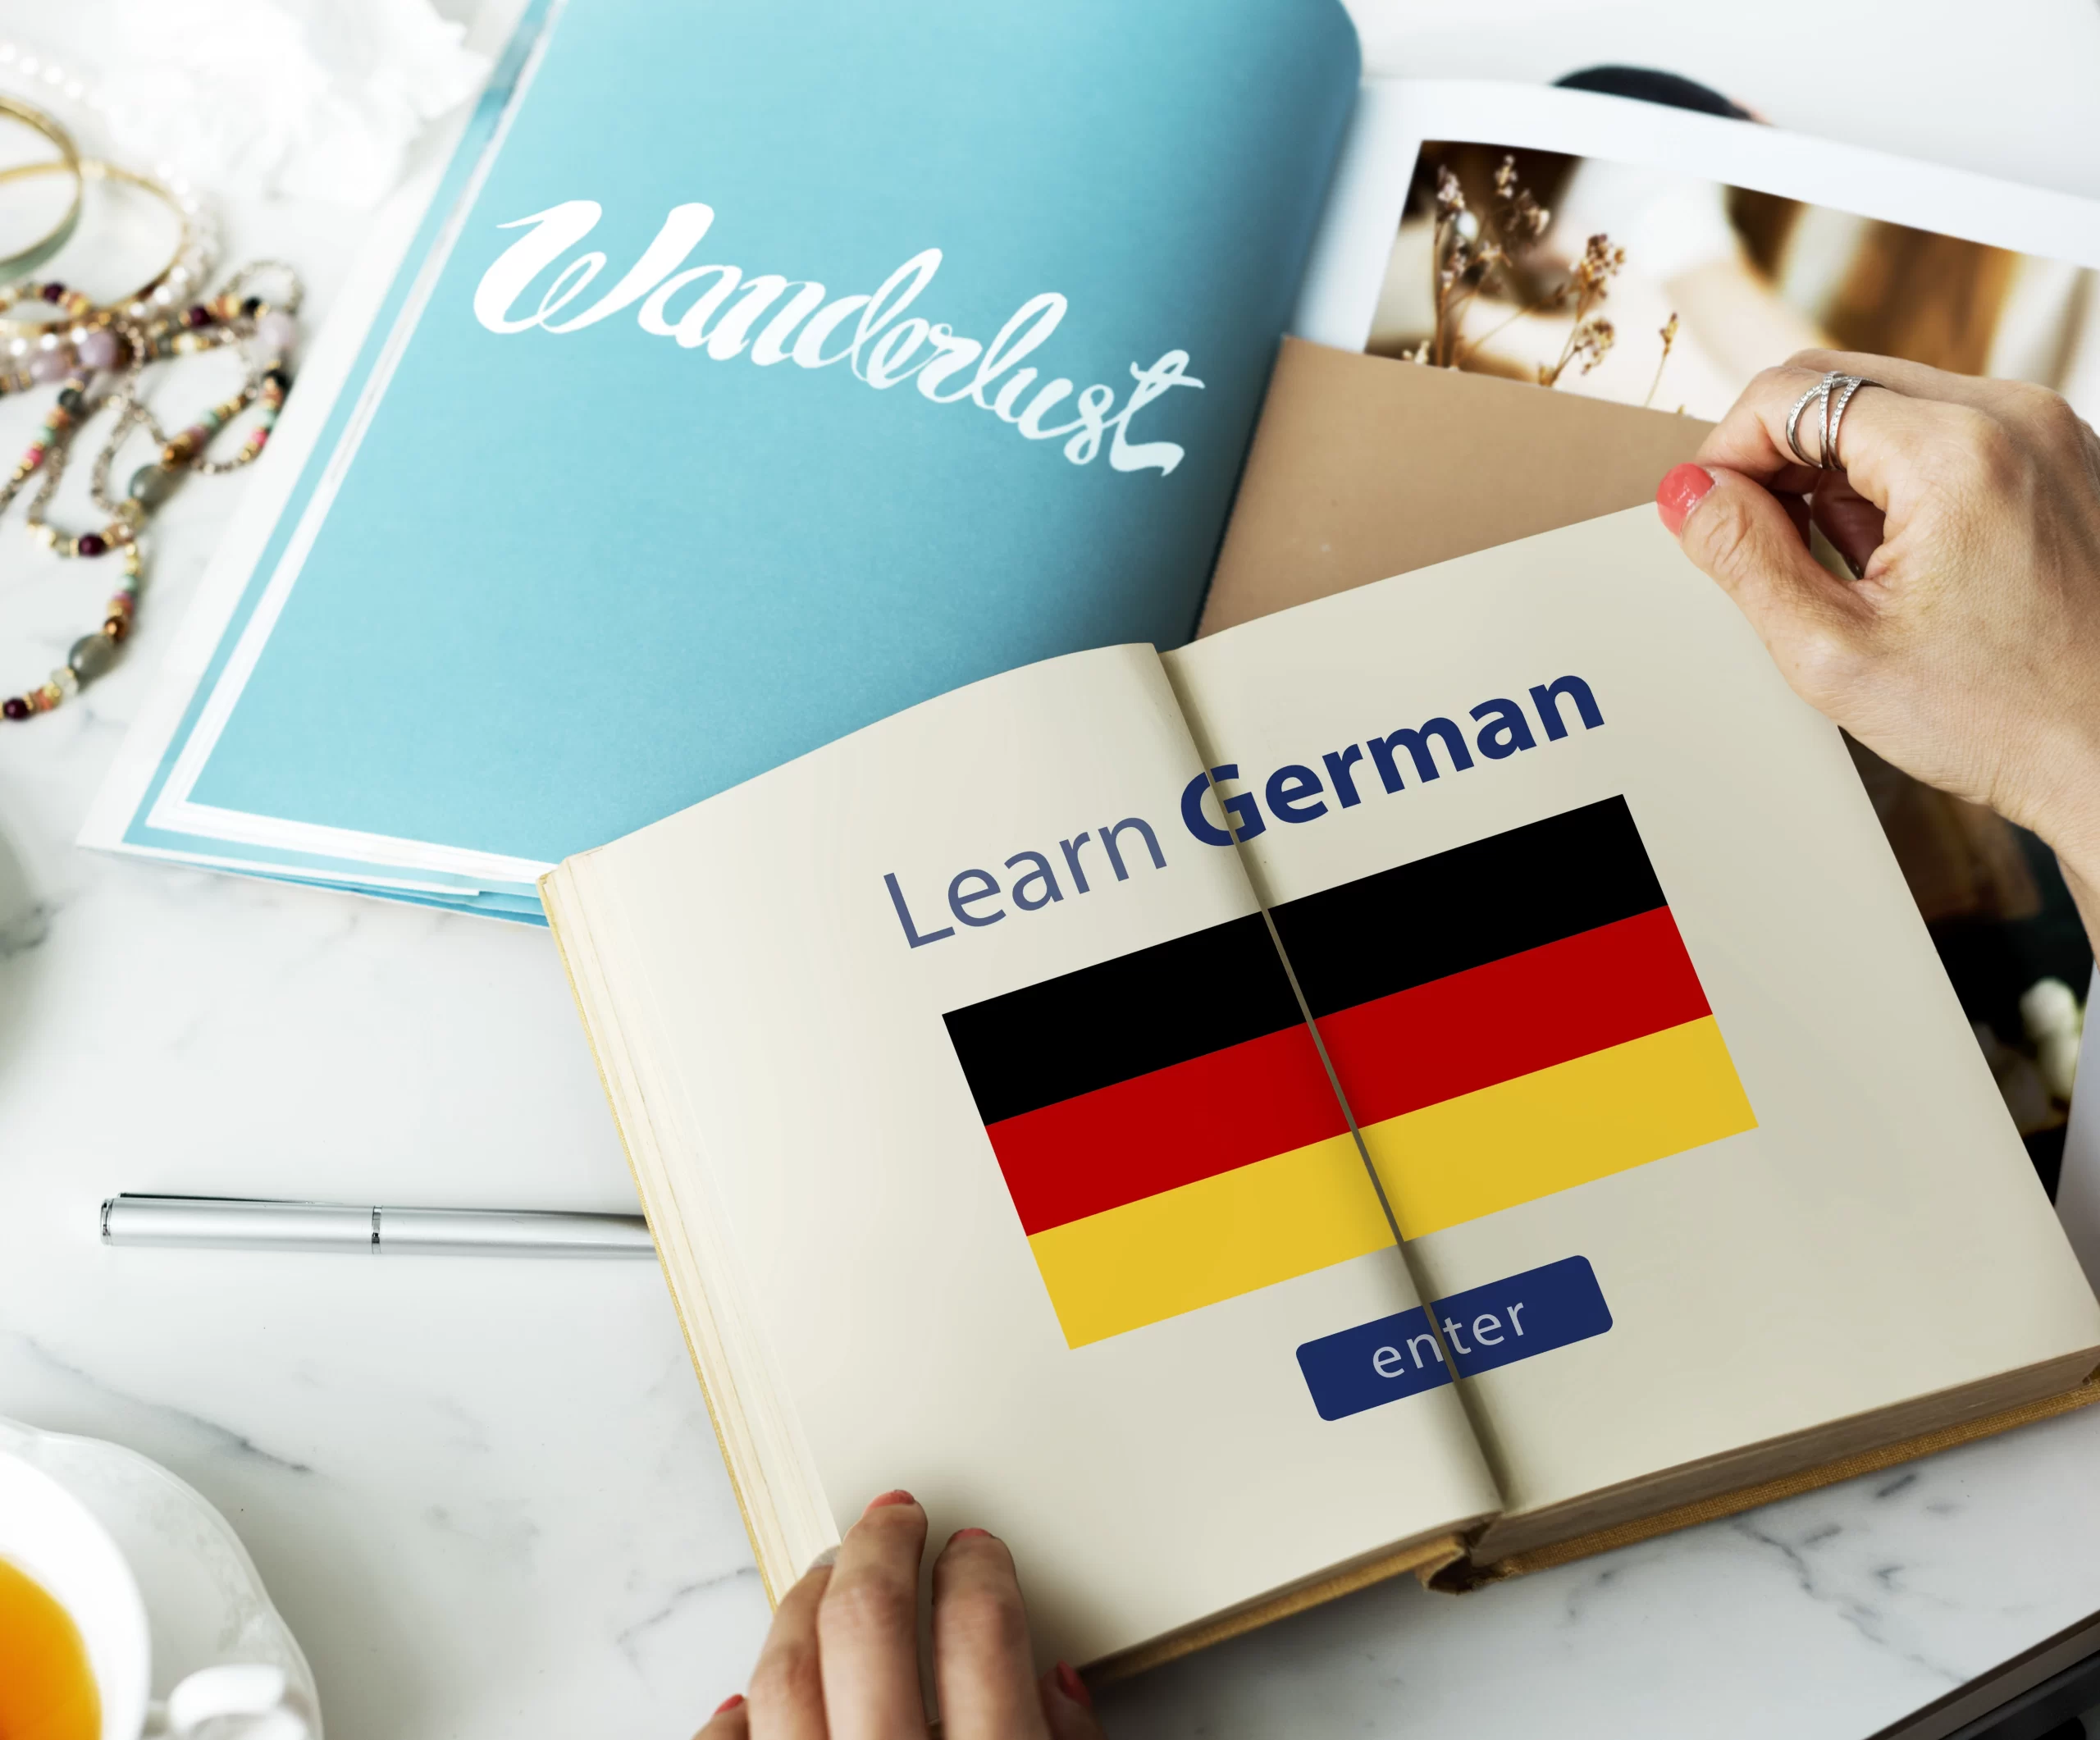 8 Steps to Quickly Master the German Language